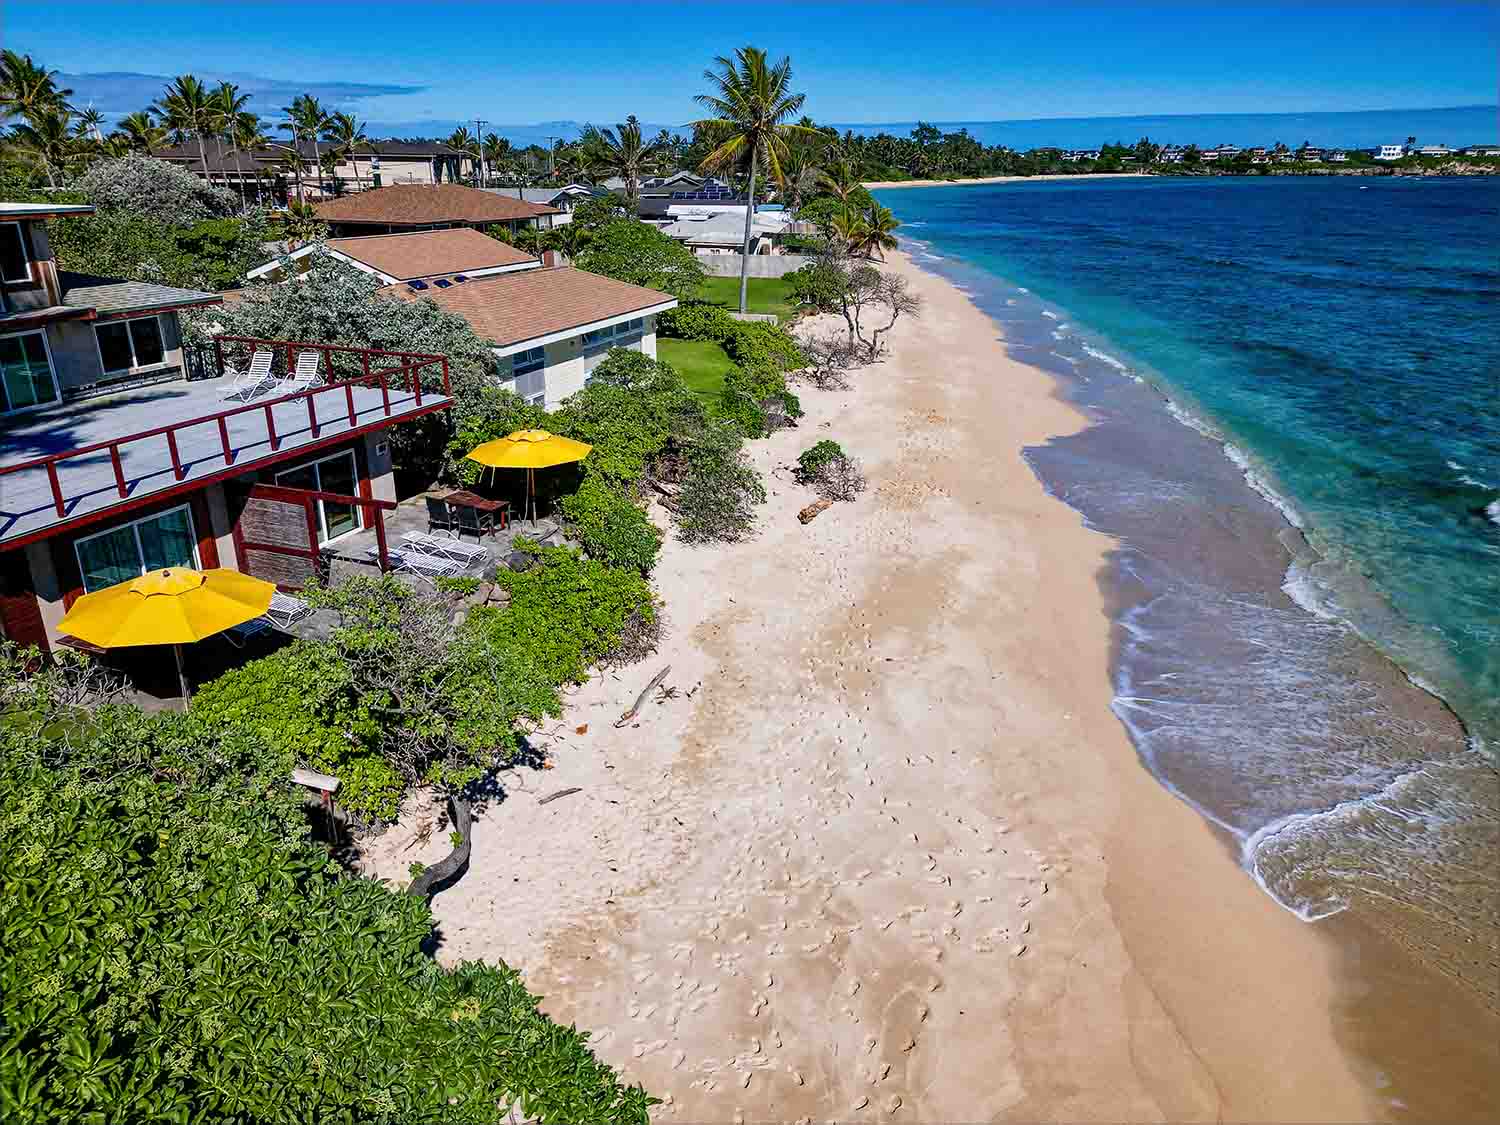 Vacation rentals on Onini Beach, in Laie Hawaii on the Island of Oahu. Experience a half mile of sandy beachfront directly from your bungalow!